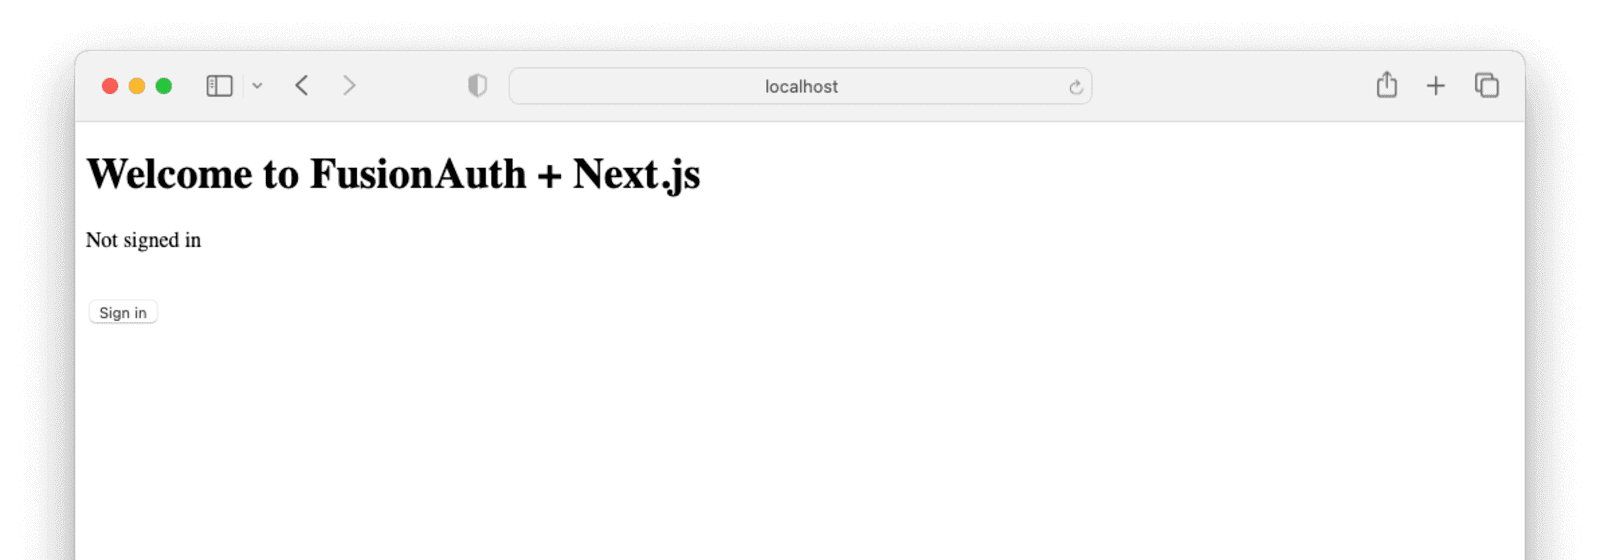 Next.js application with a signin button